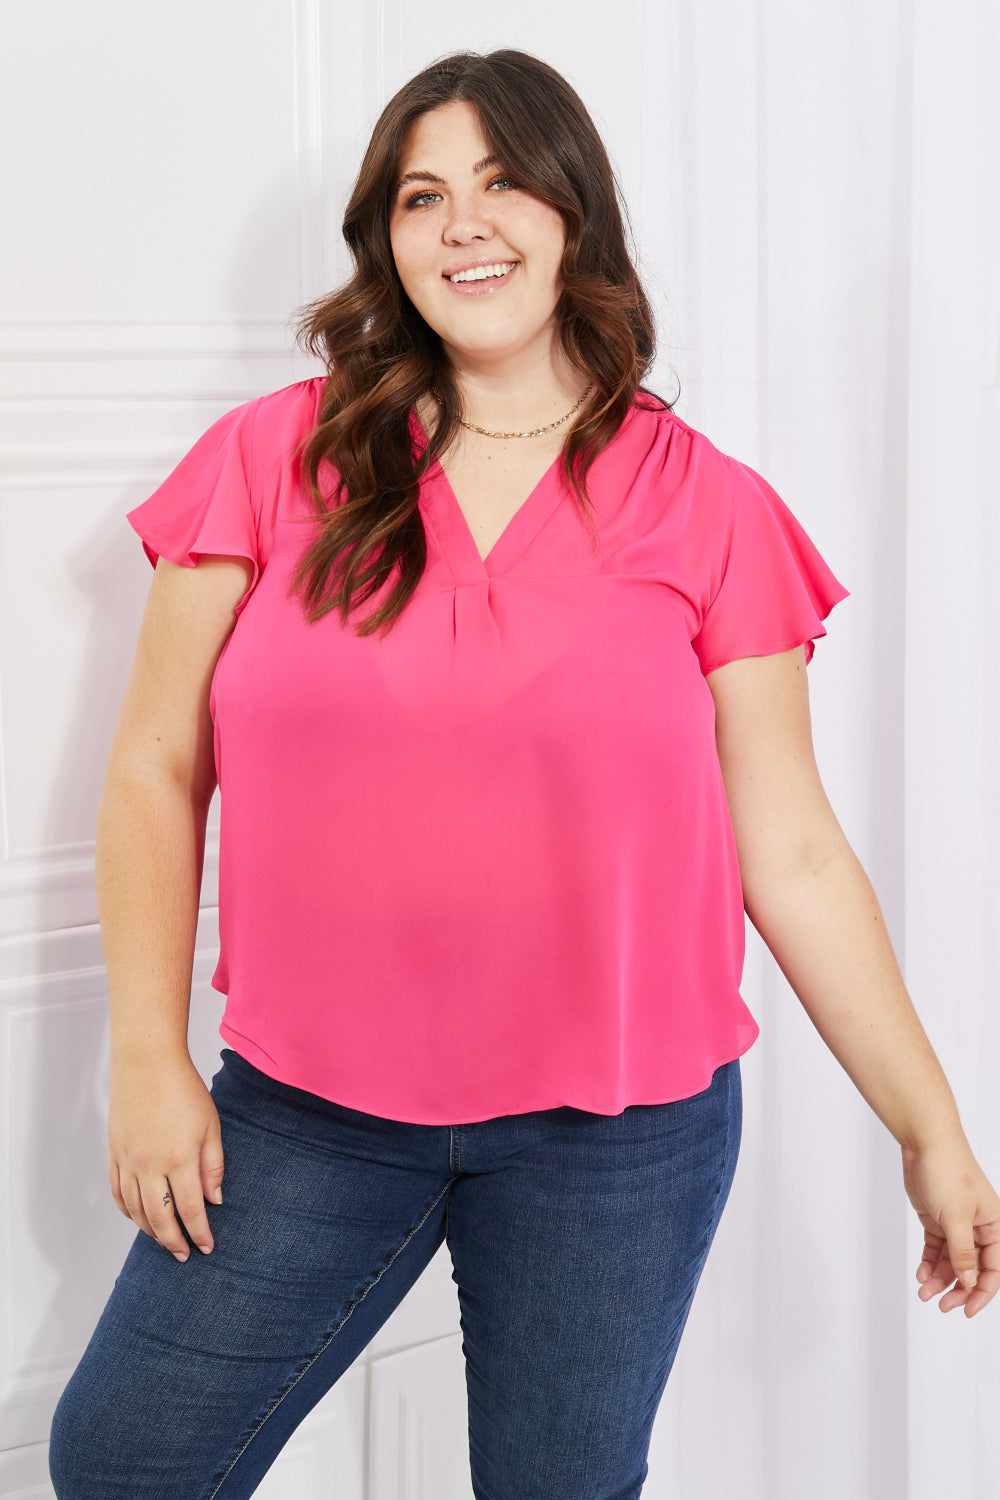 Sew In Love Just For You Full Size Short Ruffled sleeve length Top in Hot Pink-Short Sleeve Tops-Inspired by Justeen-Women's Clothing Boutique in Chicago, Illinois